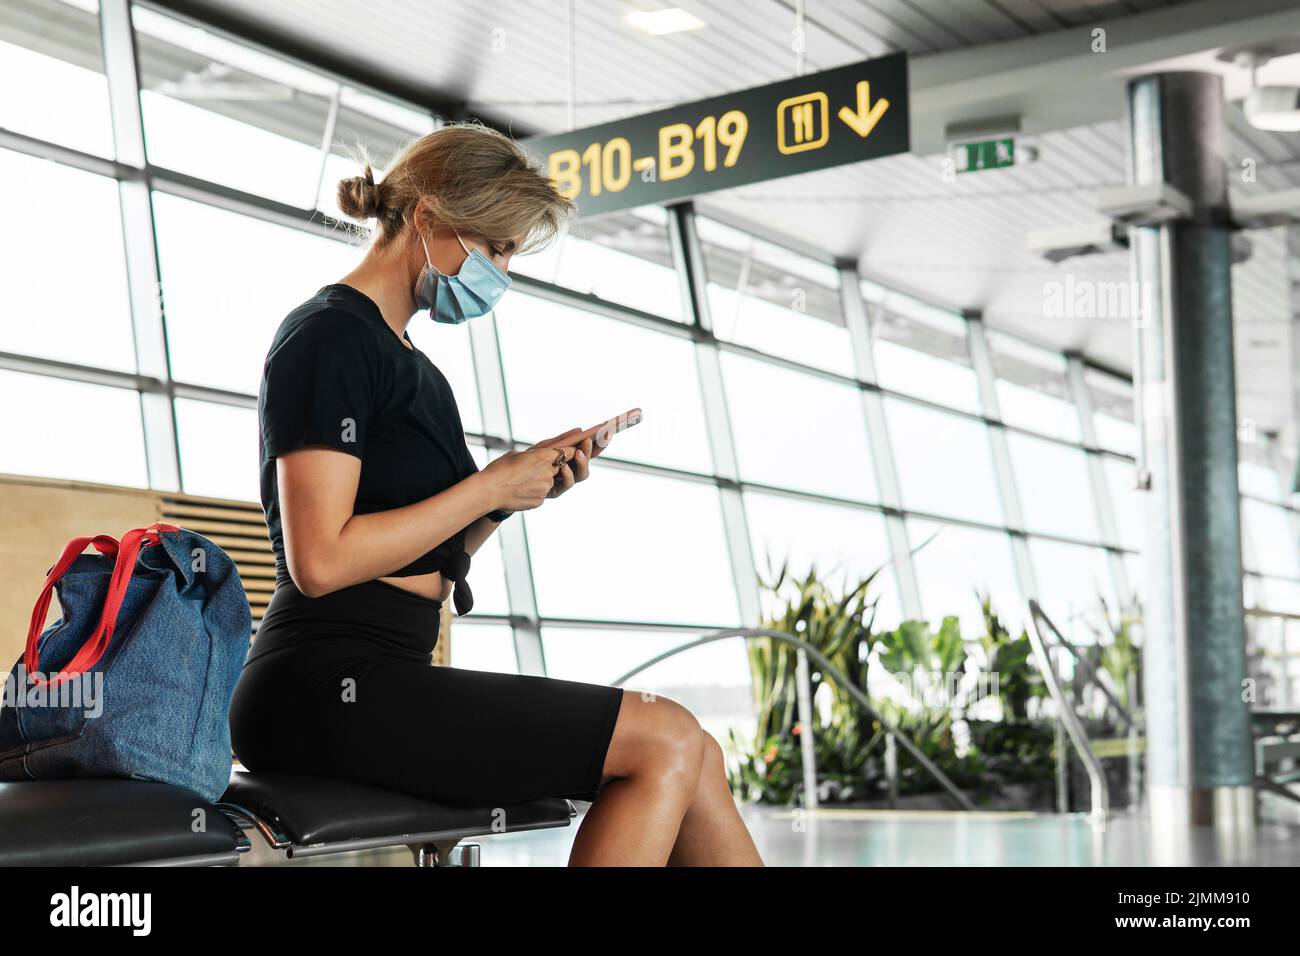 Young woman is a wearing prevention mask in an airport during flight awaiting Stock Photo